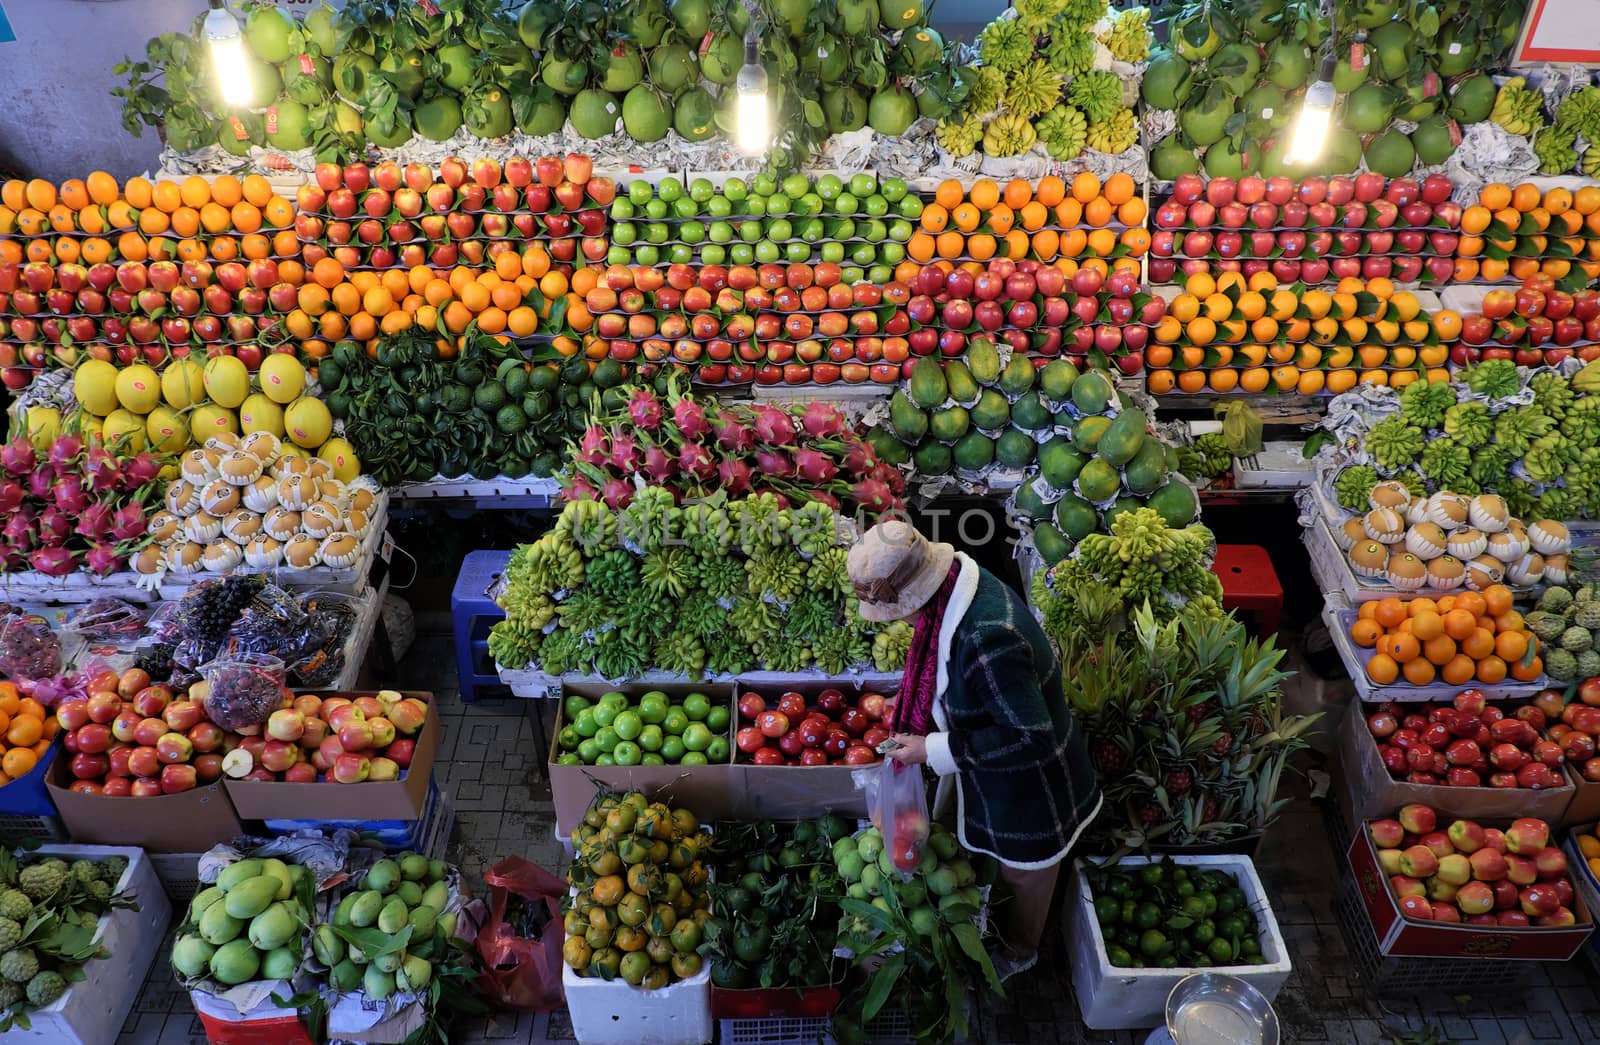 Colorful of fruit shop at Dalat marketplace, Vietnam, many kind of fresh tropical fruits arrange so amazing, agriculture product at farmer market